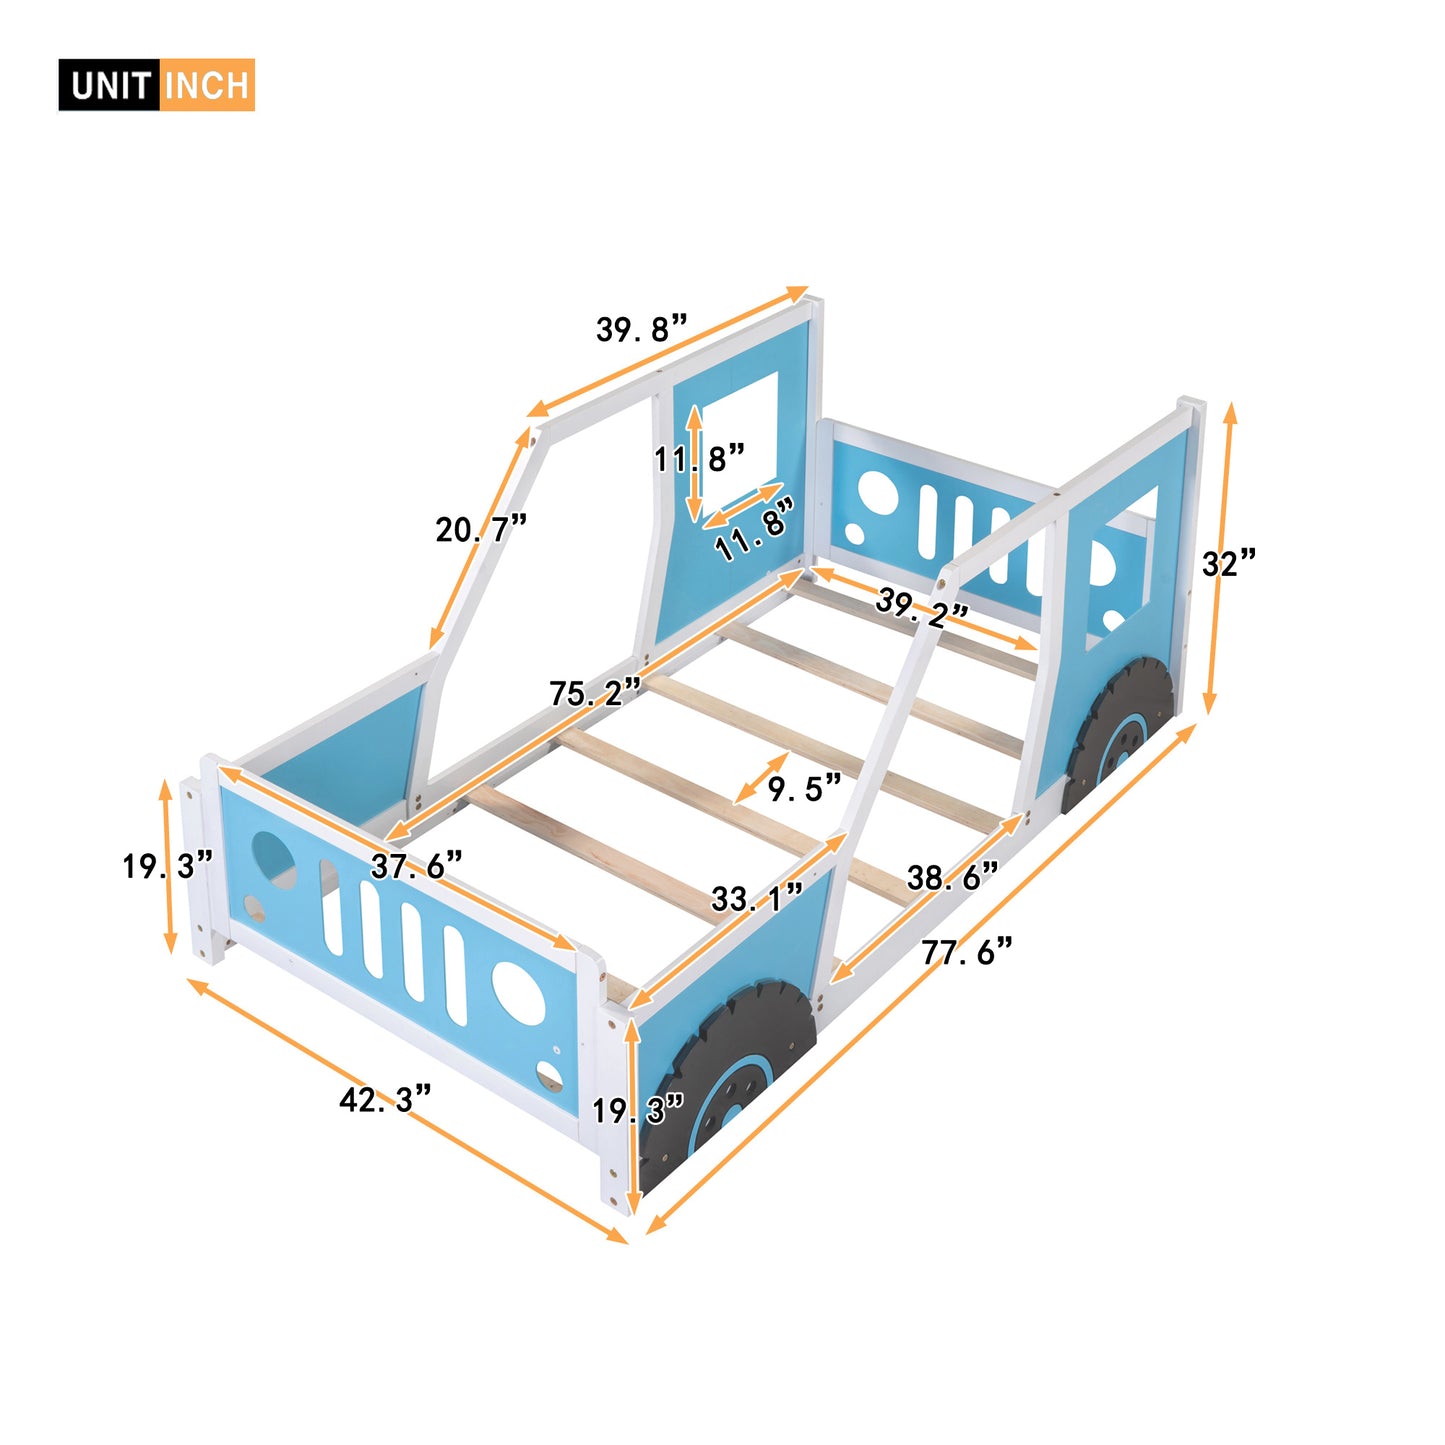 Twin Size Classic Car-Shaped Platform Bed with Wheels; Blue or White